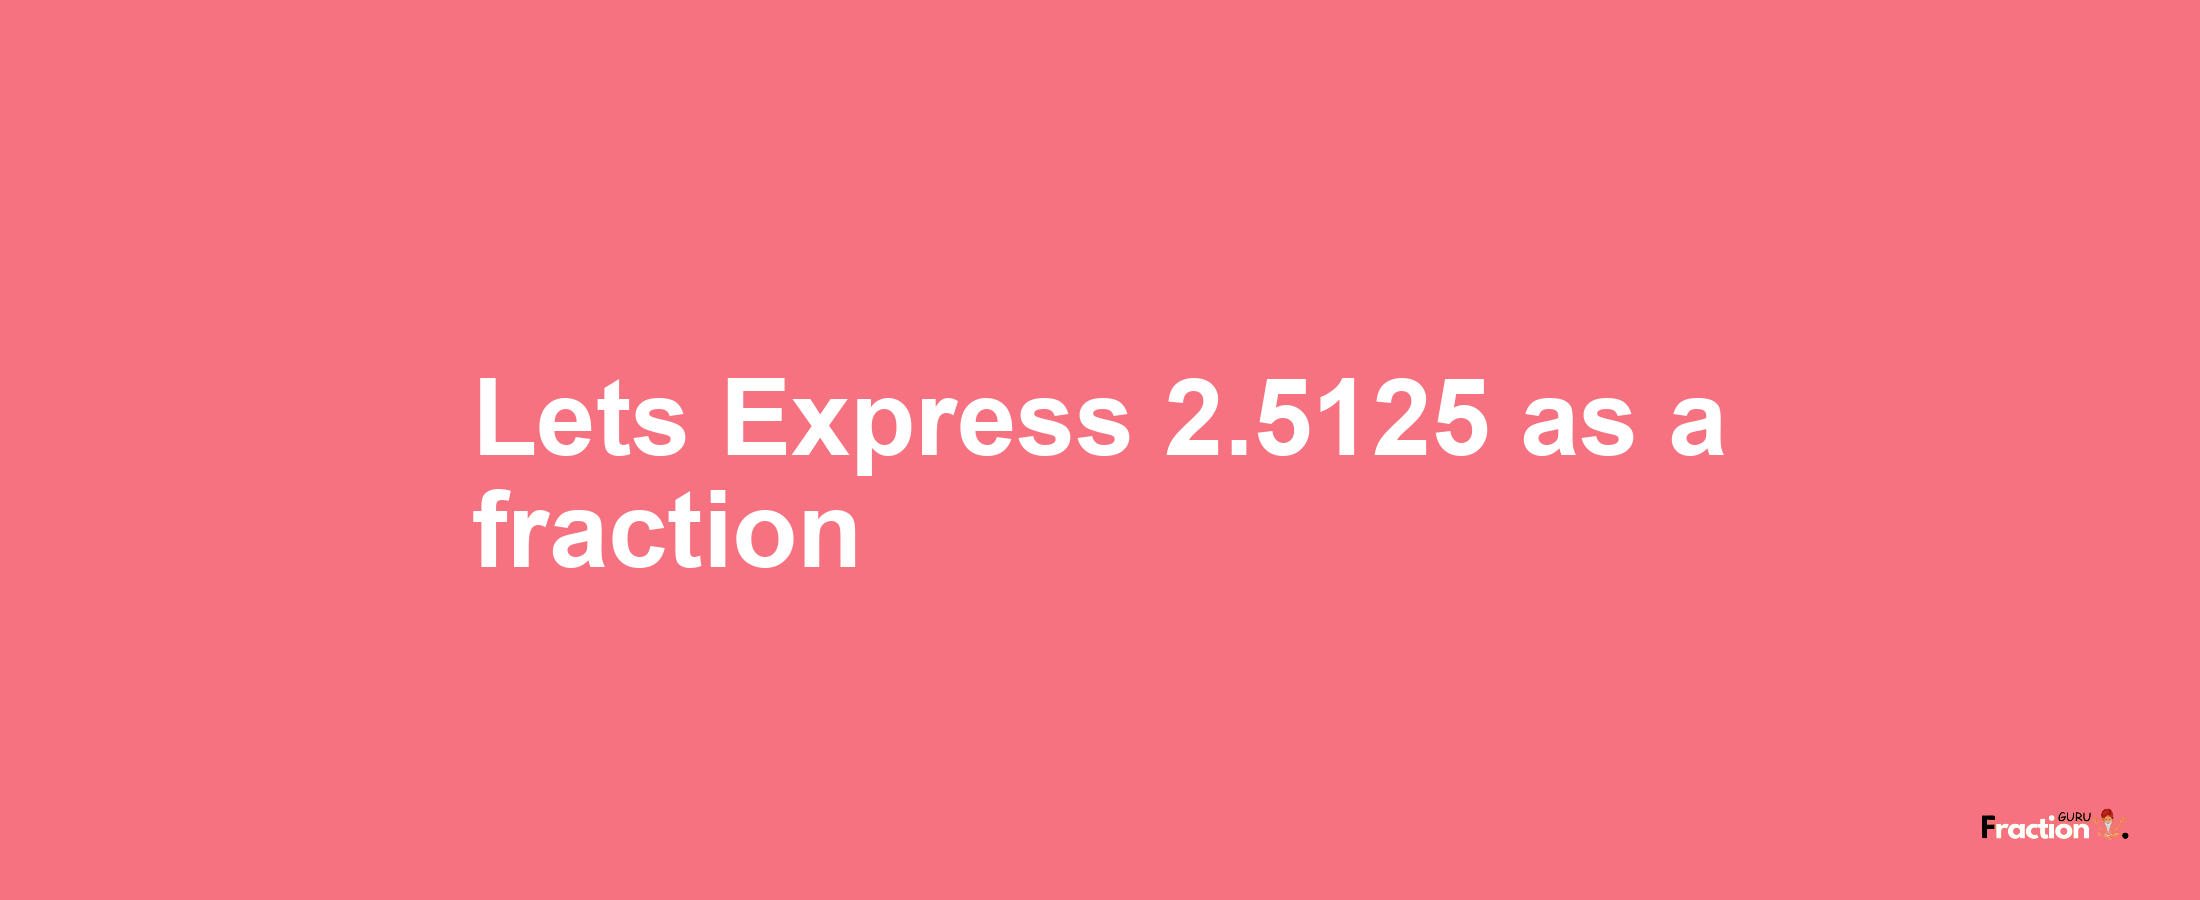 Lets Express 2.5125 as afraction